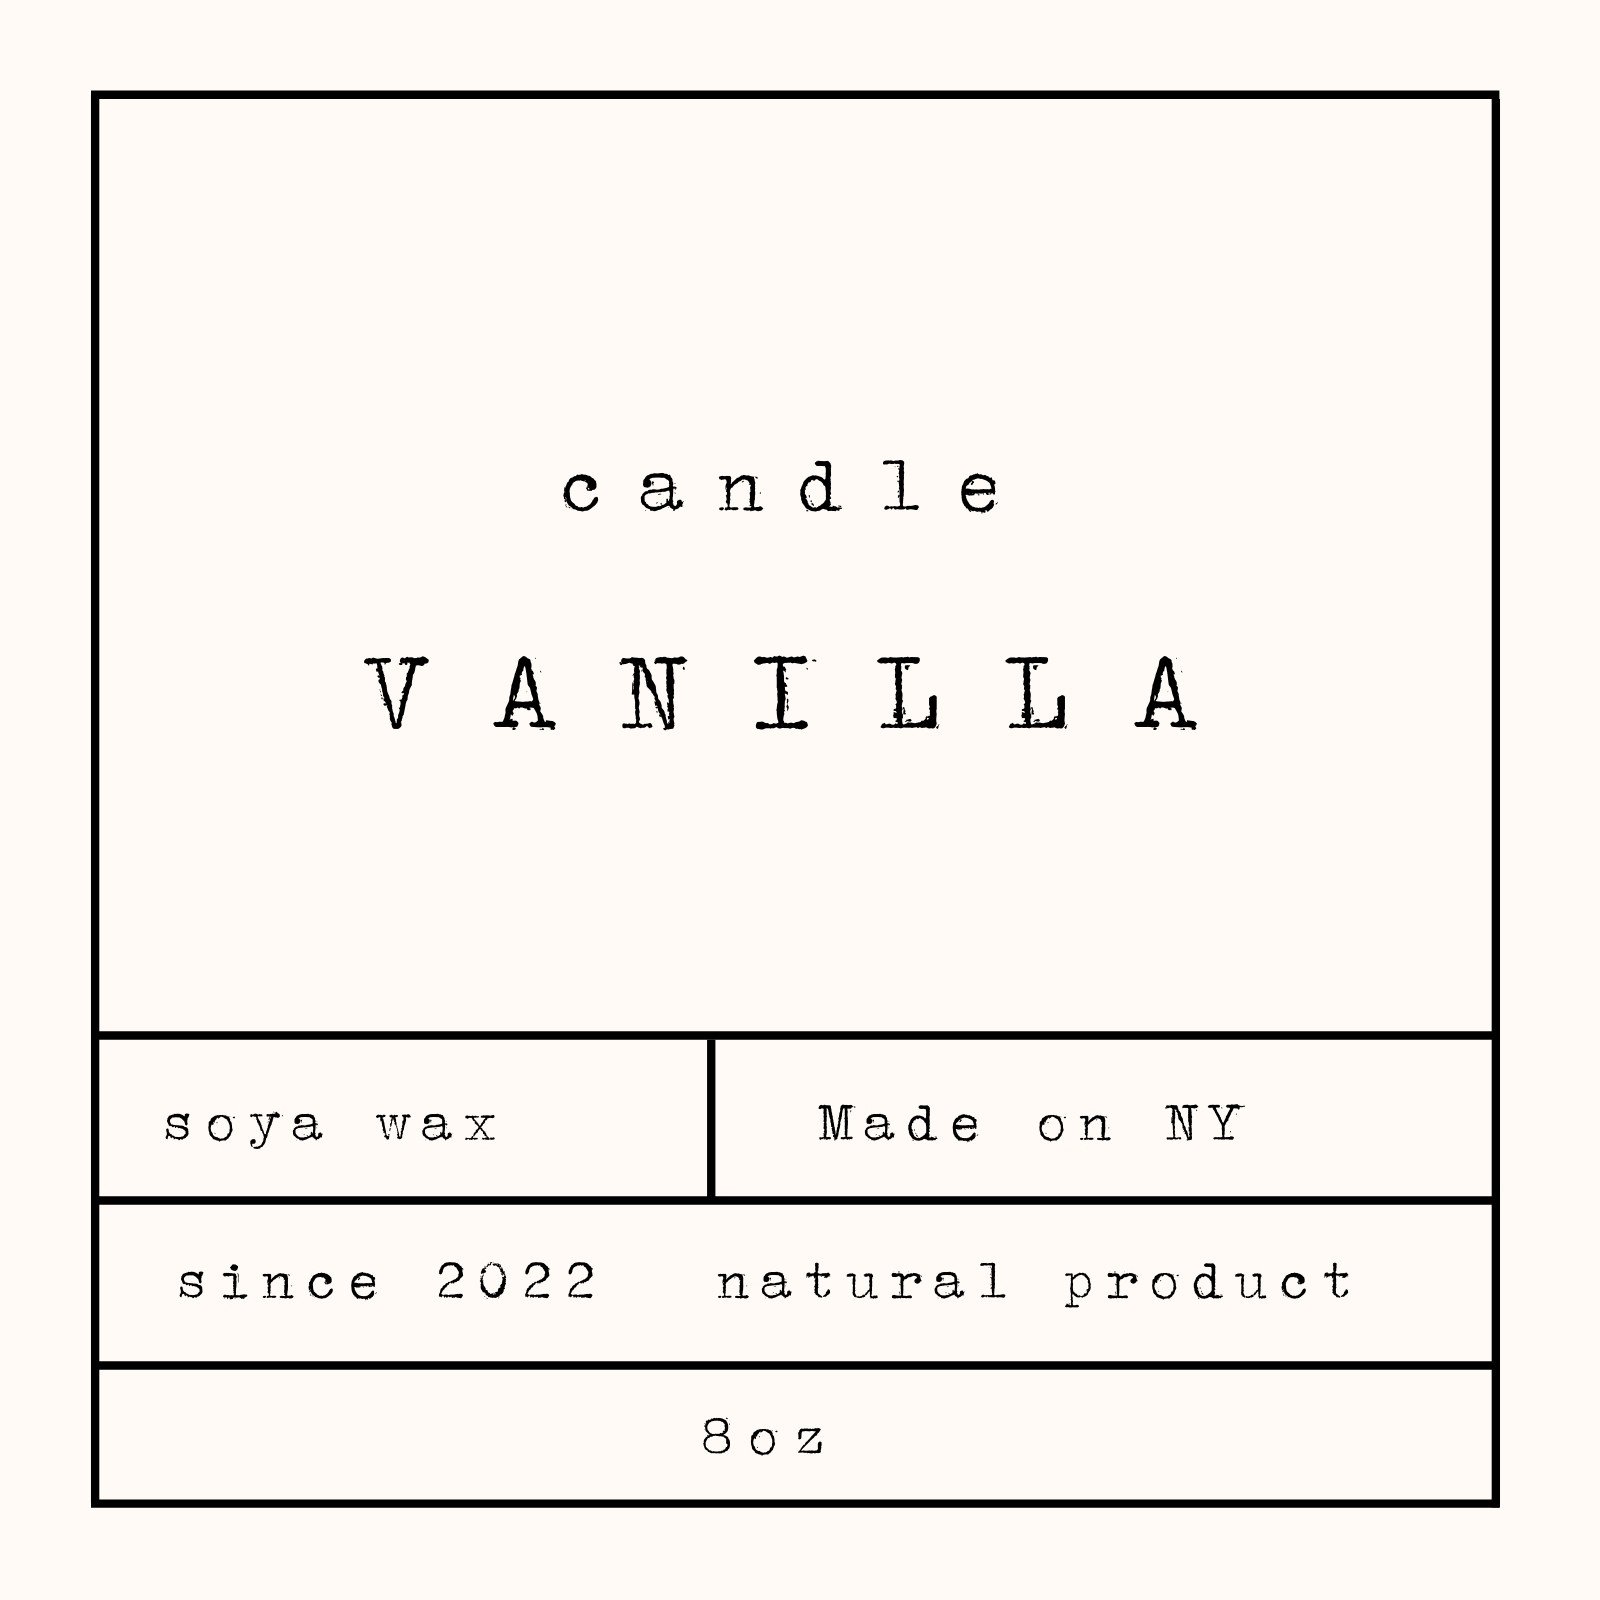 Candle Labels - Printable Candle Labels on A4 Sheets